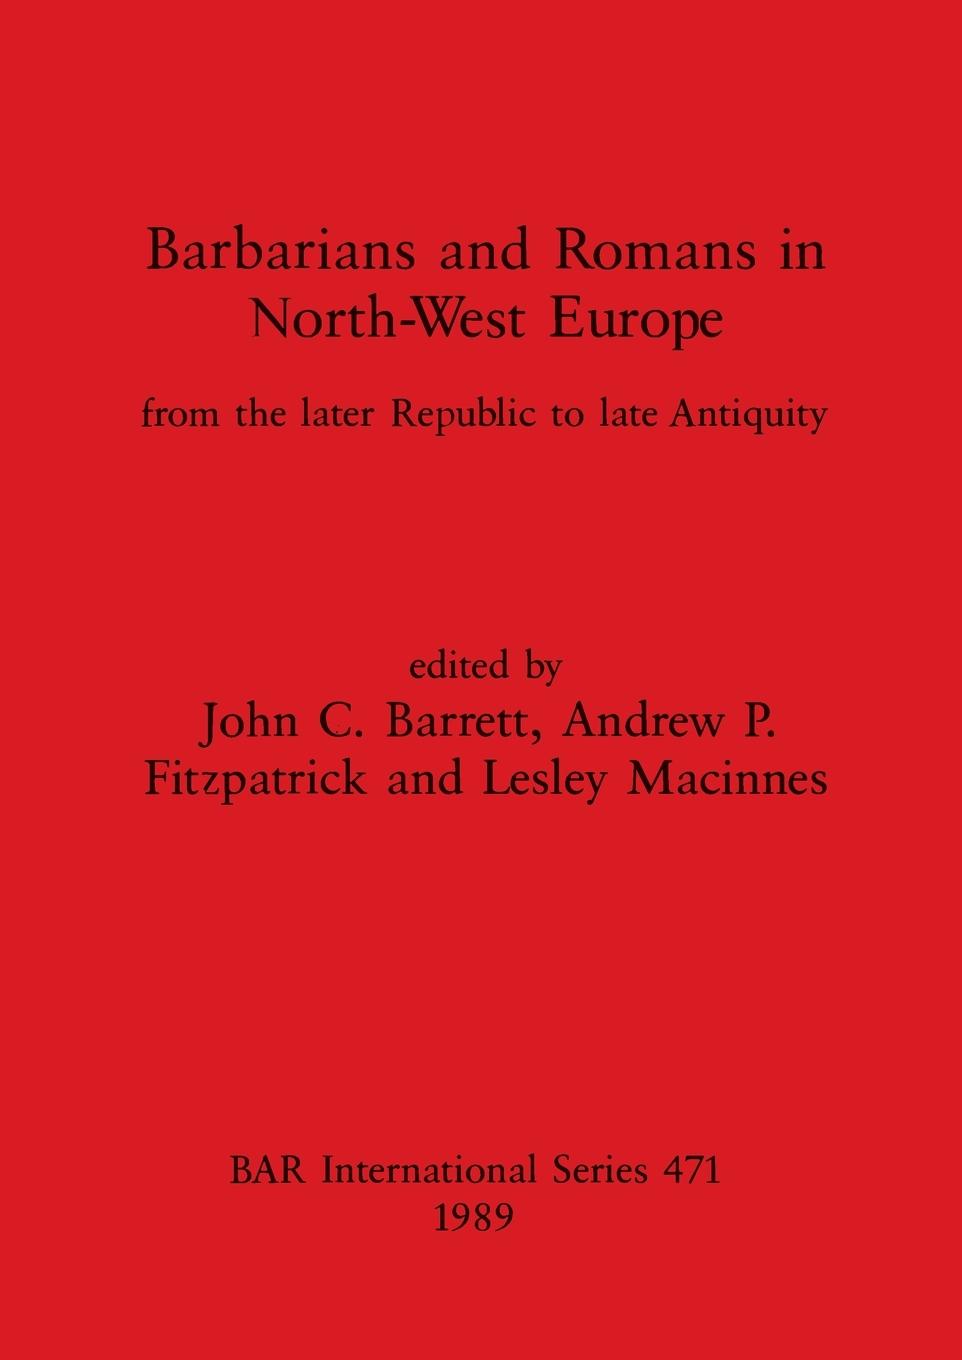 Barbarians and Romans in North-West Europe